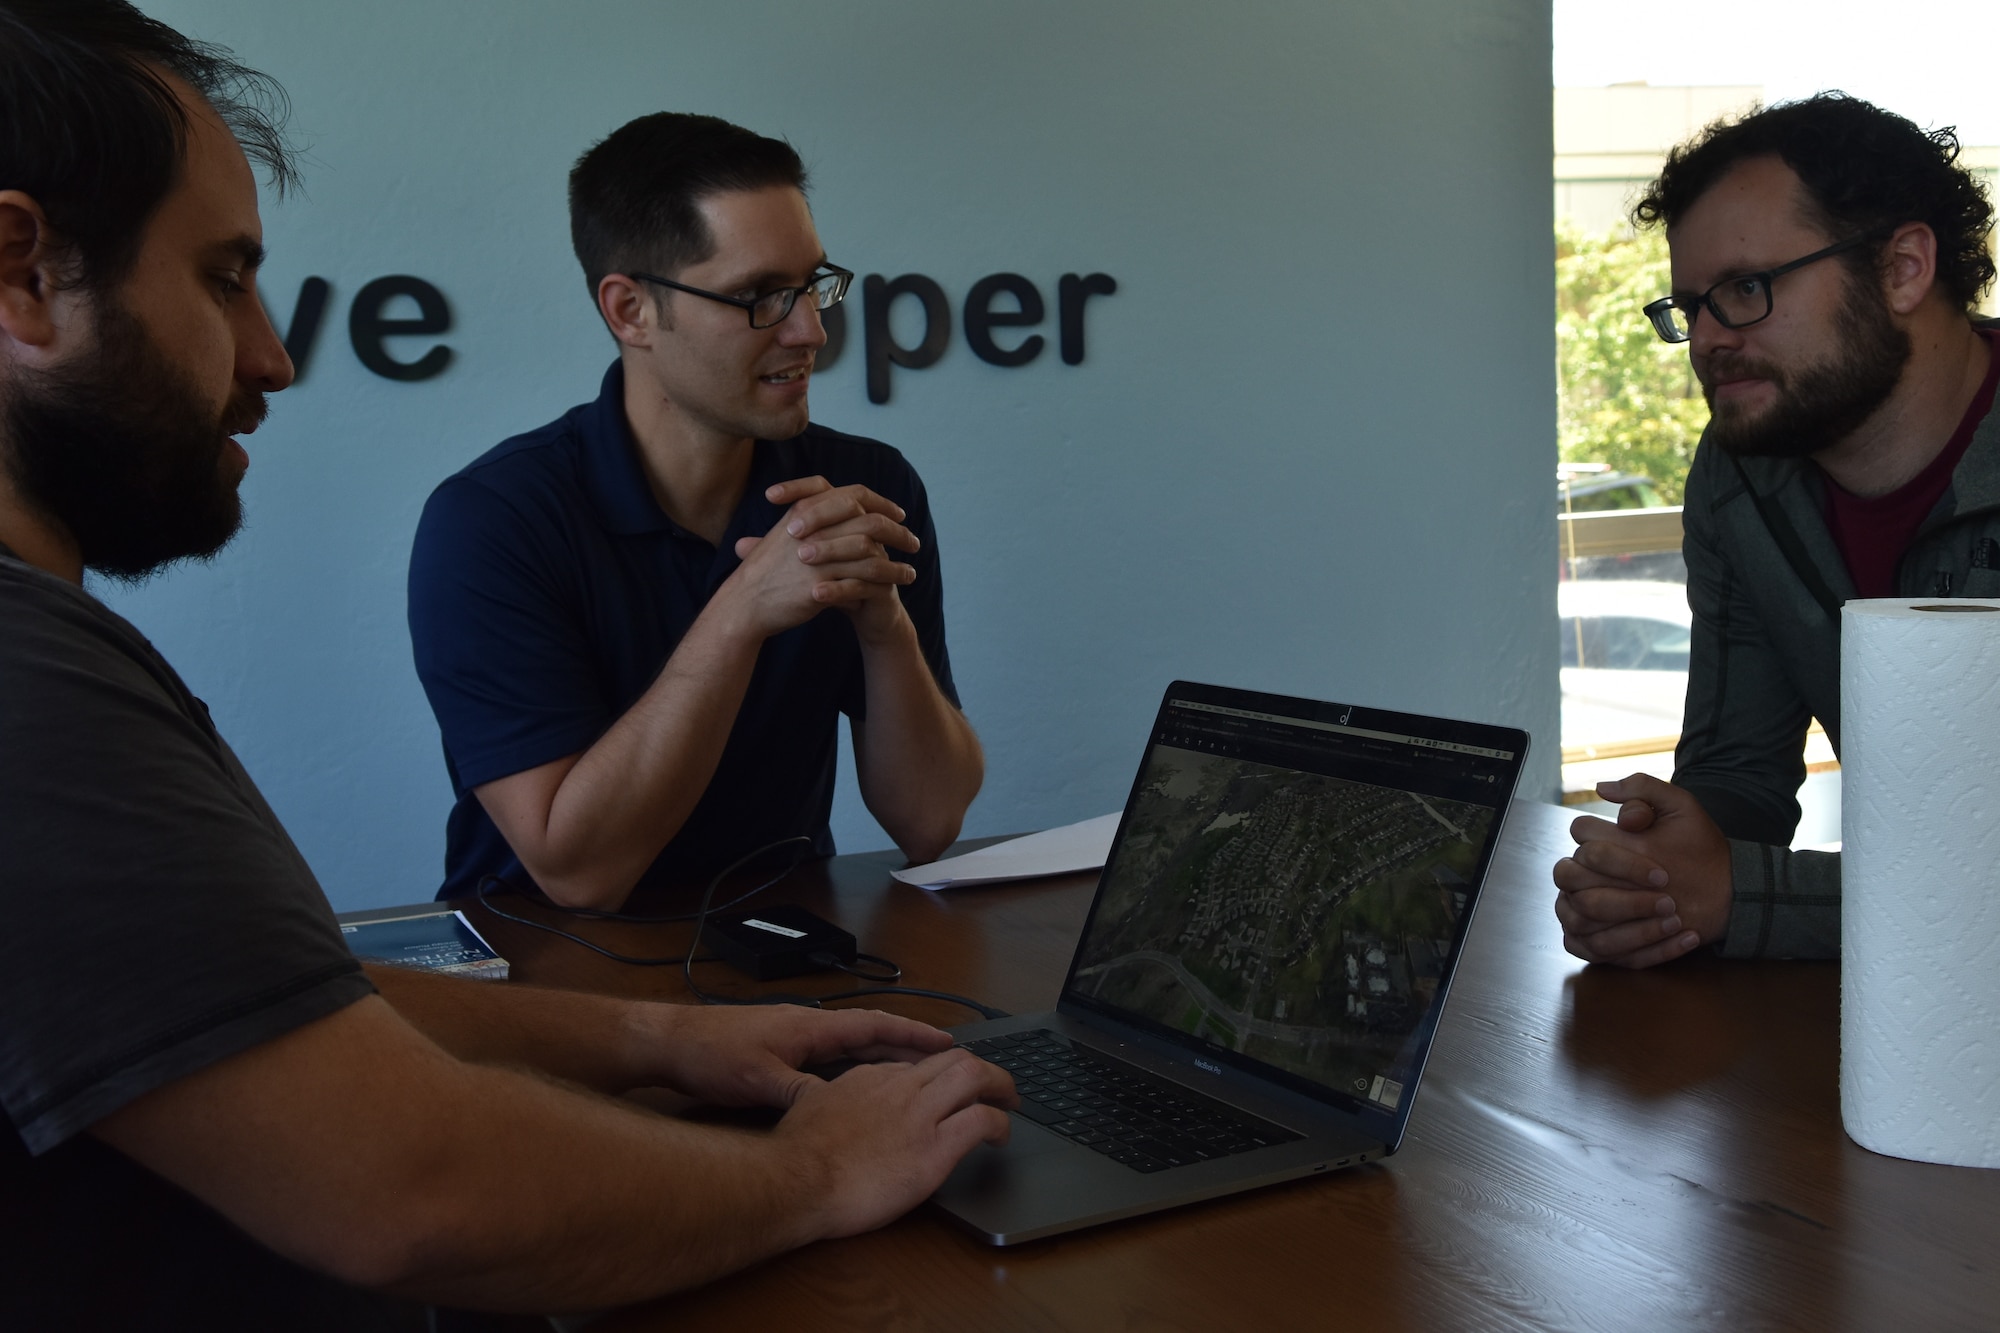 Will Urbina, Hivemapper head of flight operations, meets with Master Sgt. Nathaniel May, 9th Intelligence Squadron operations superintendent, and Dane Perry, Hivemapper product head, at the software company in San Francisco, California, June 4, 2019. Beale members have been partnering with the Hivemapper team since late 2018, to utilize the program as a way to same time, money, and manpower, while improving security capabilities.  (U.S. Air Force photo by Tech. Sgt. Veronica Montes)